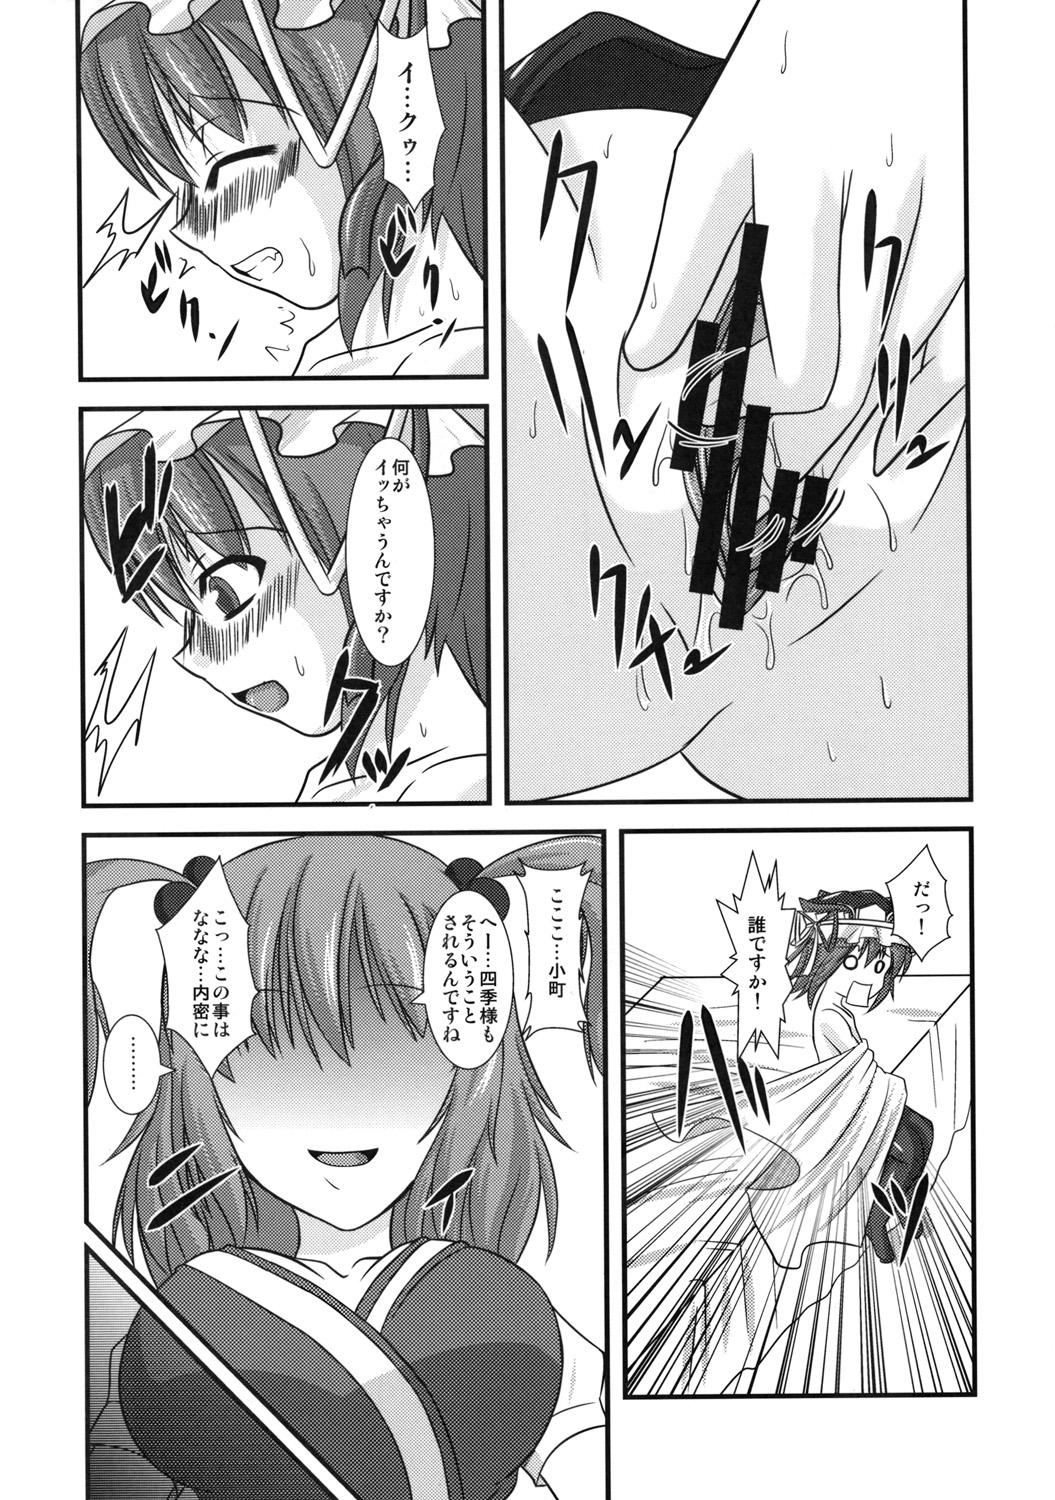 Porn Amateur 主従反転 - Touhou project 18 Year Old Porn - Page 5